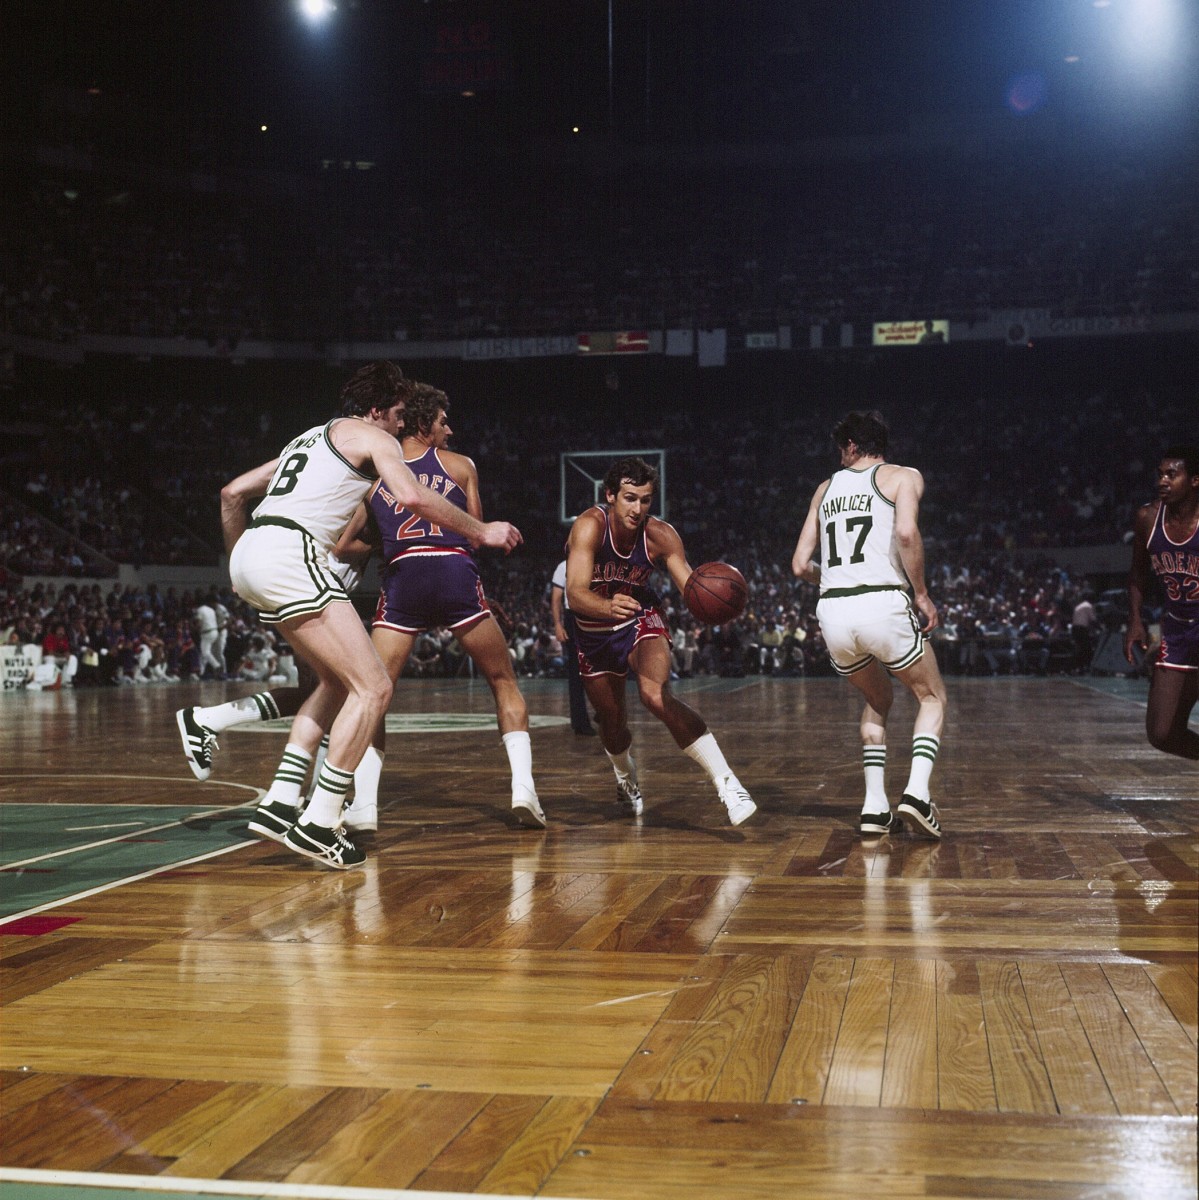 UNITED STATES - JUNE 04:  Basketball: NBA Finals, Phoenix Suns Paul Westphal (44) in action vs Boston Celtics, Game 5, Boston, MA 6/4/1976  (Photo by Dick Raphael/Sports Illustrated/Getty Images)  (SetNumber: X20558 TK2)